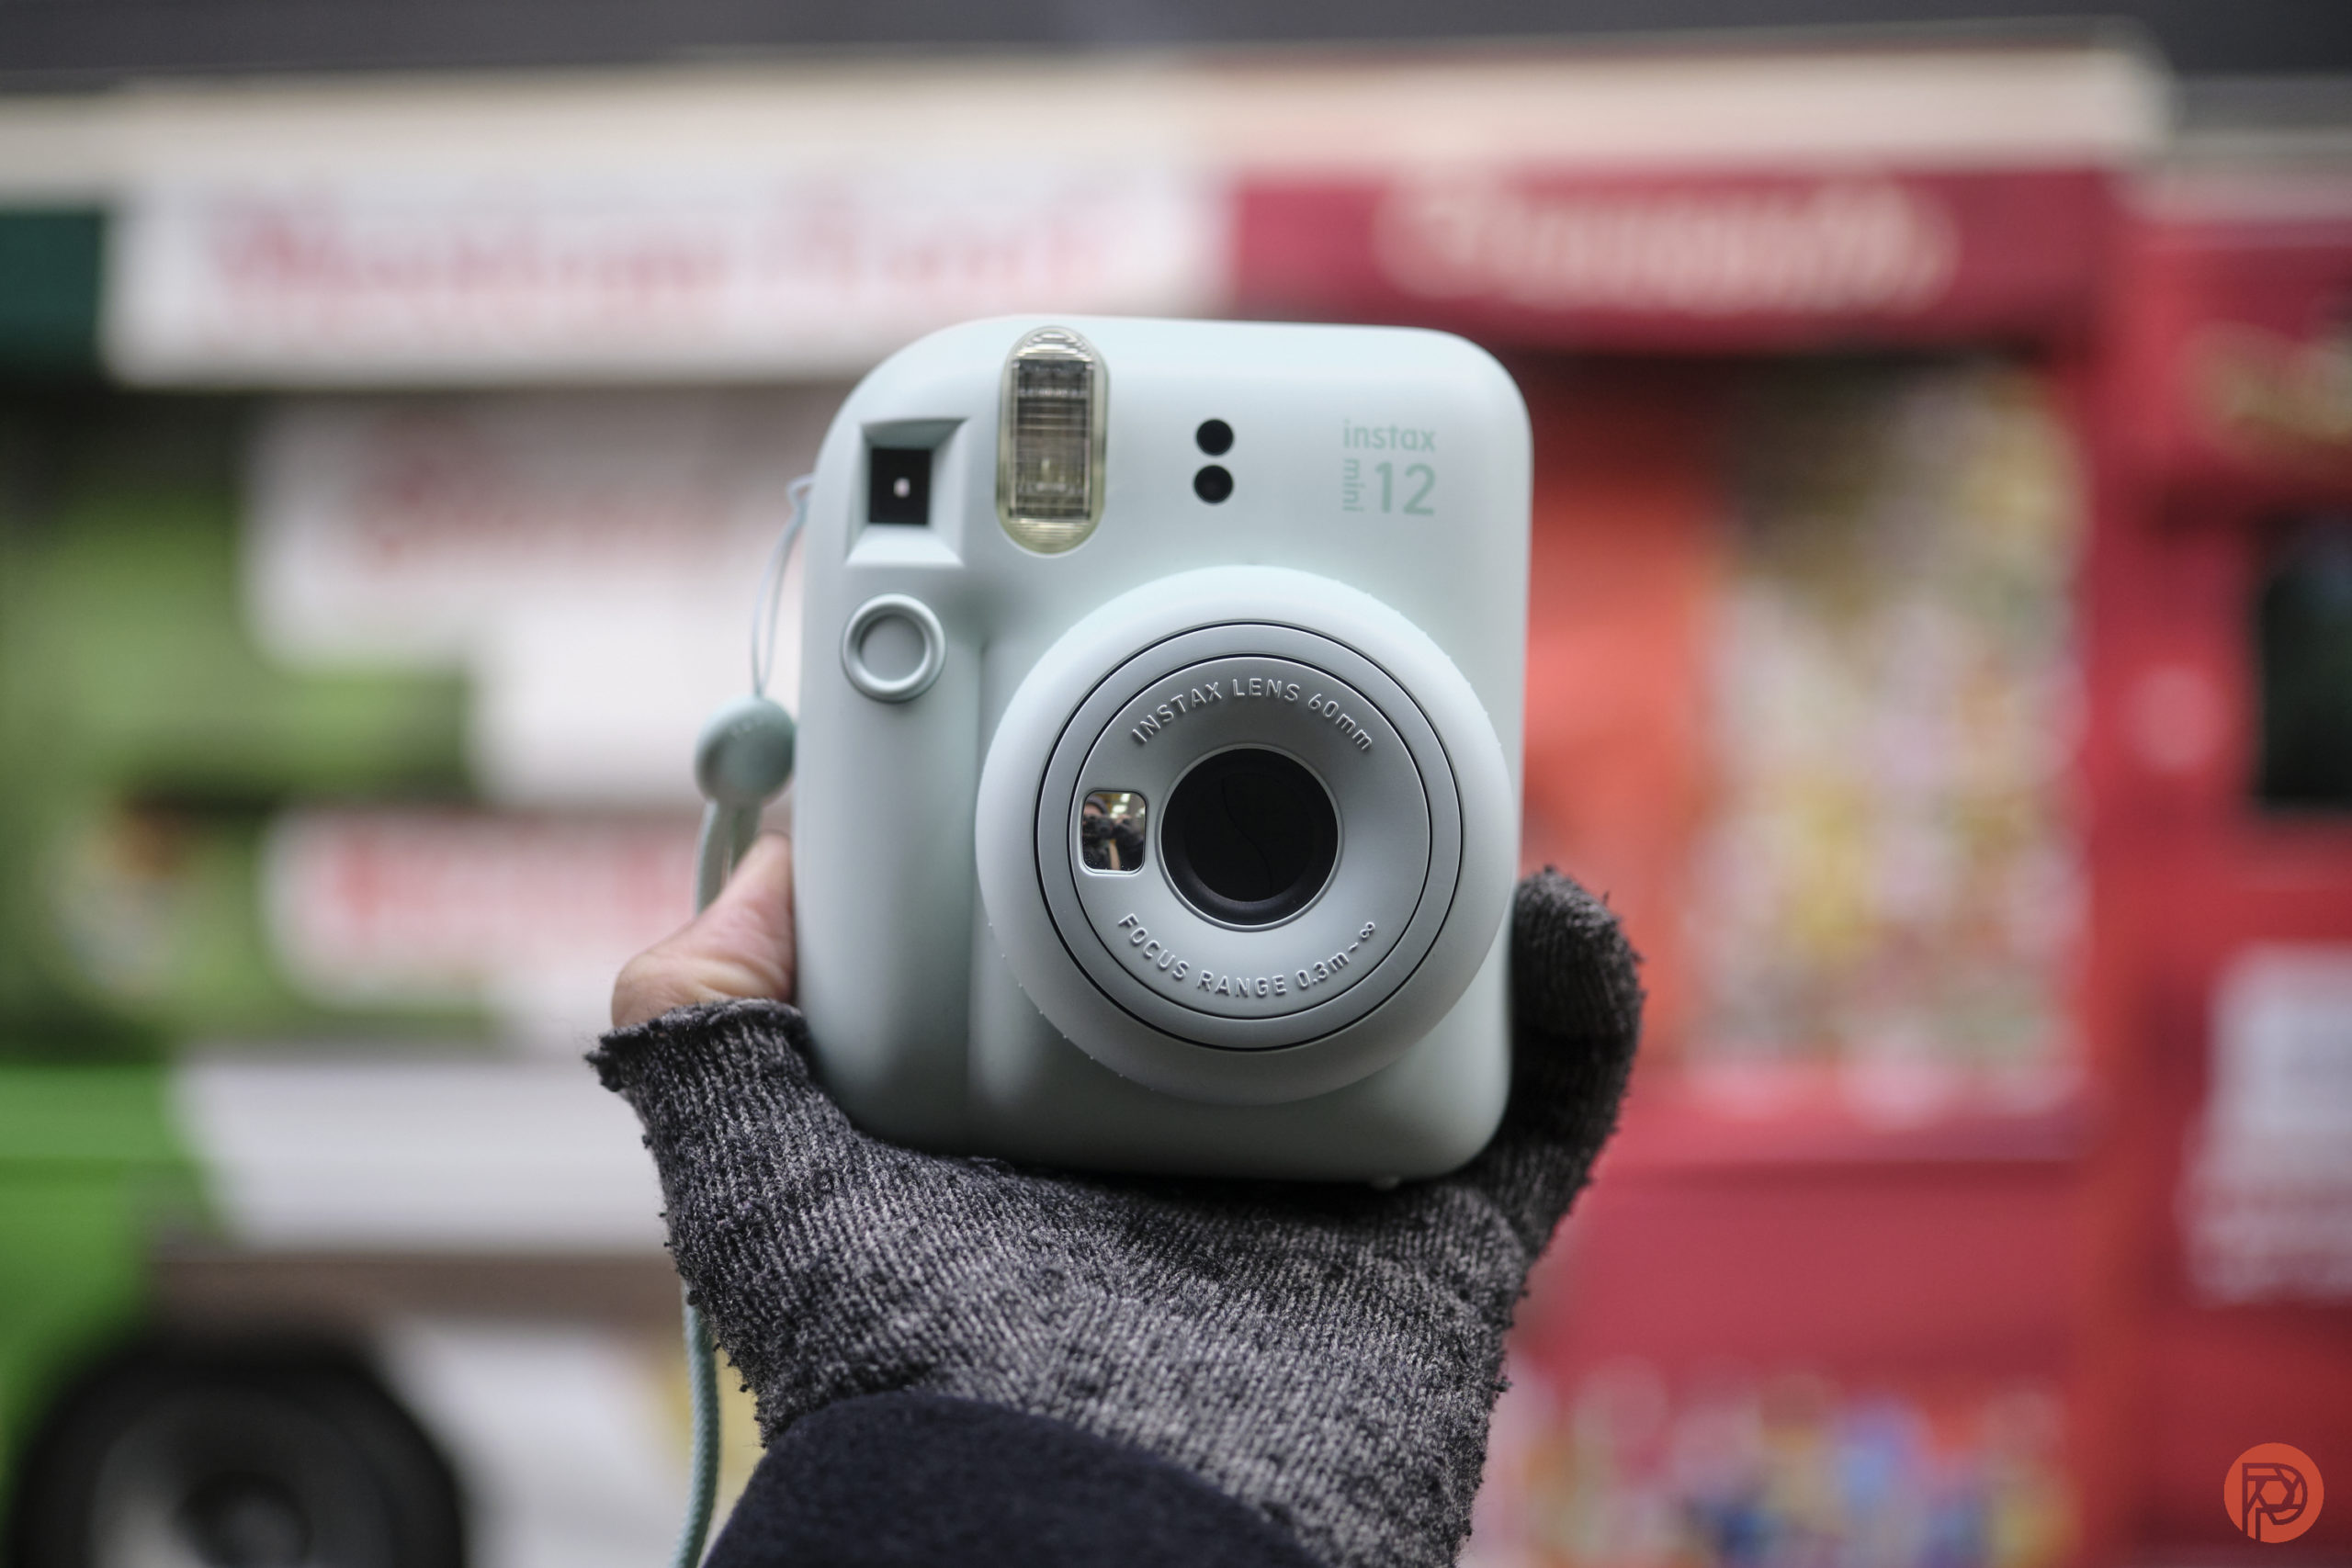 Chris Gampat The Phoblographer Fujifilm Instax Mini 12 review product images 1.41-1000s320